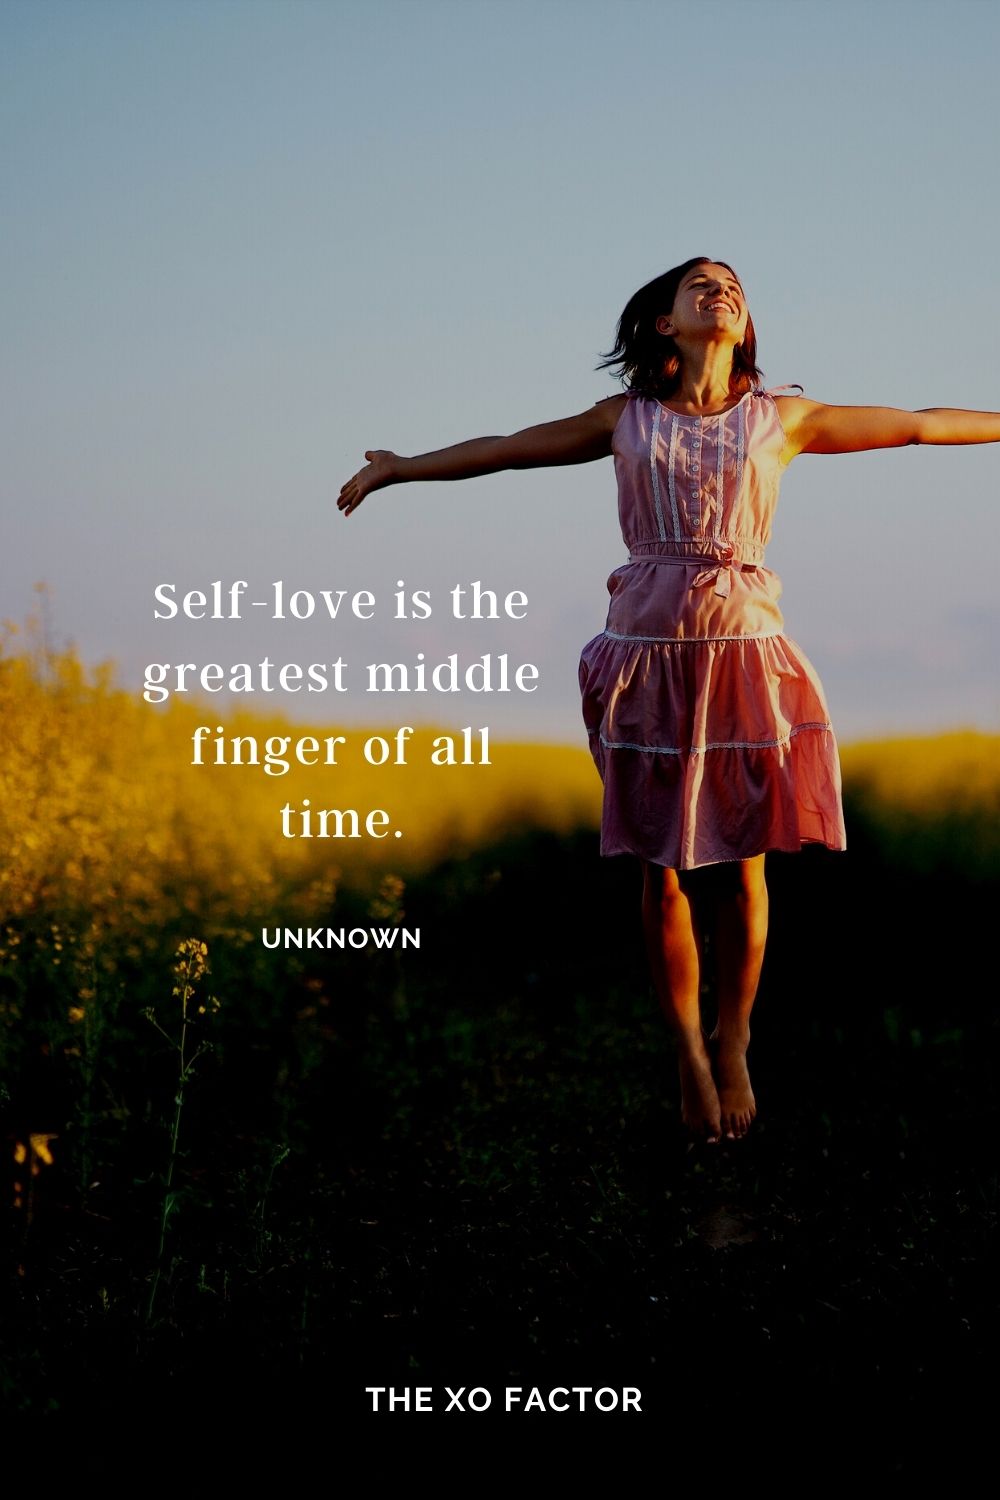 Self-love is the greatest middle finger of all time. Unknown